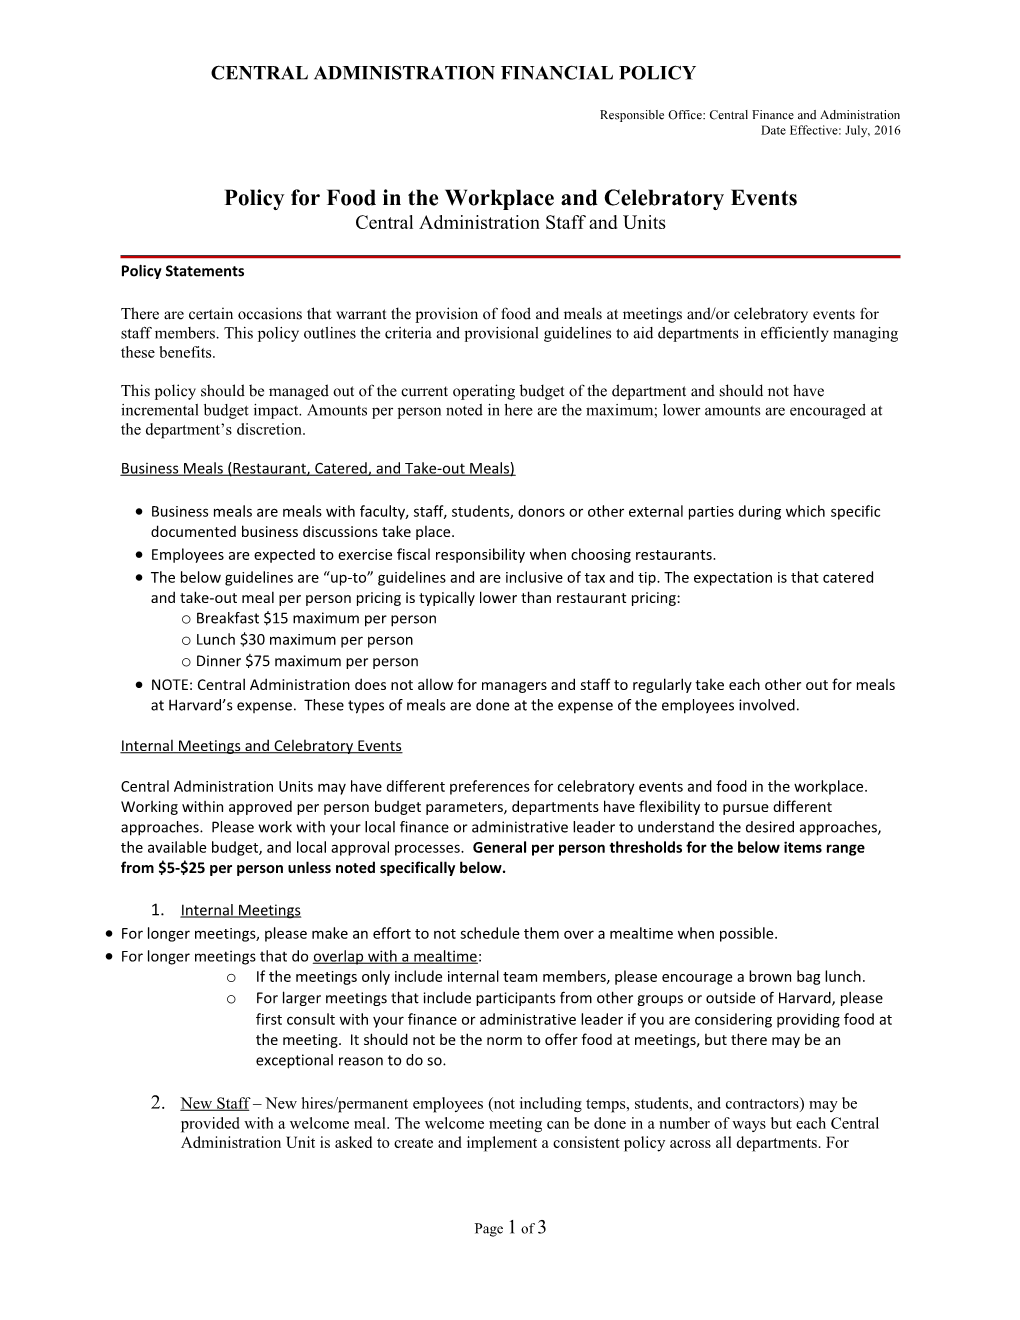 Policy for Food in the Workplace and Celebratory Events